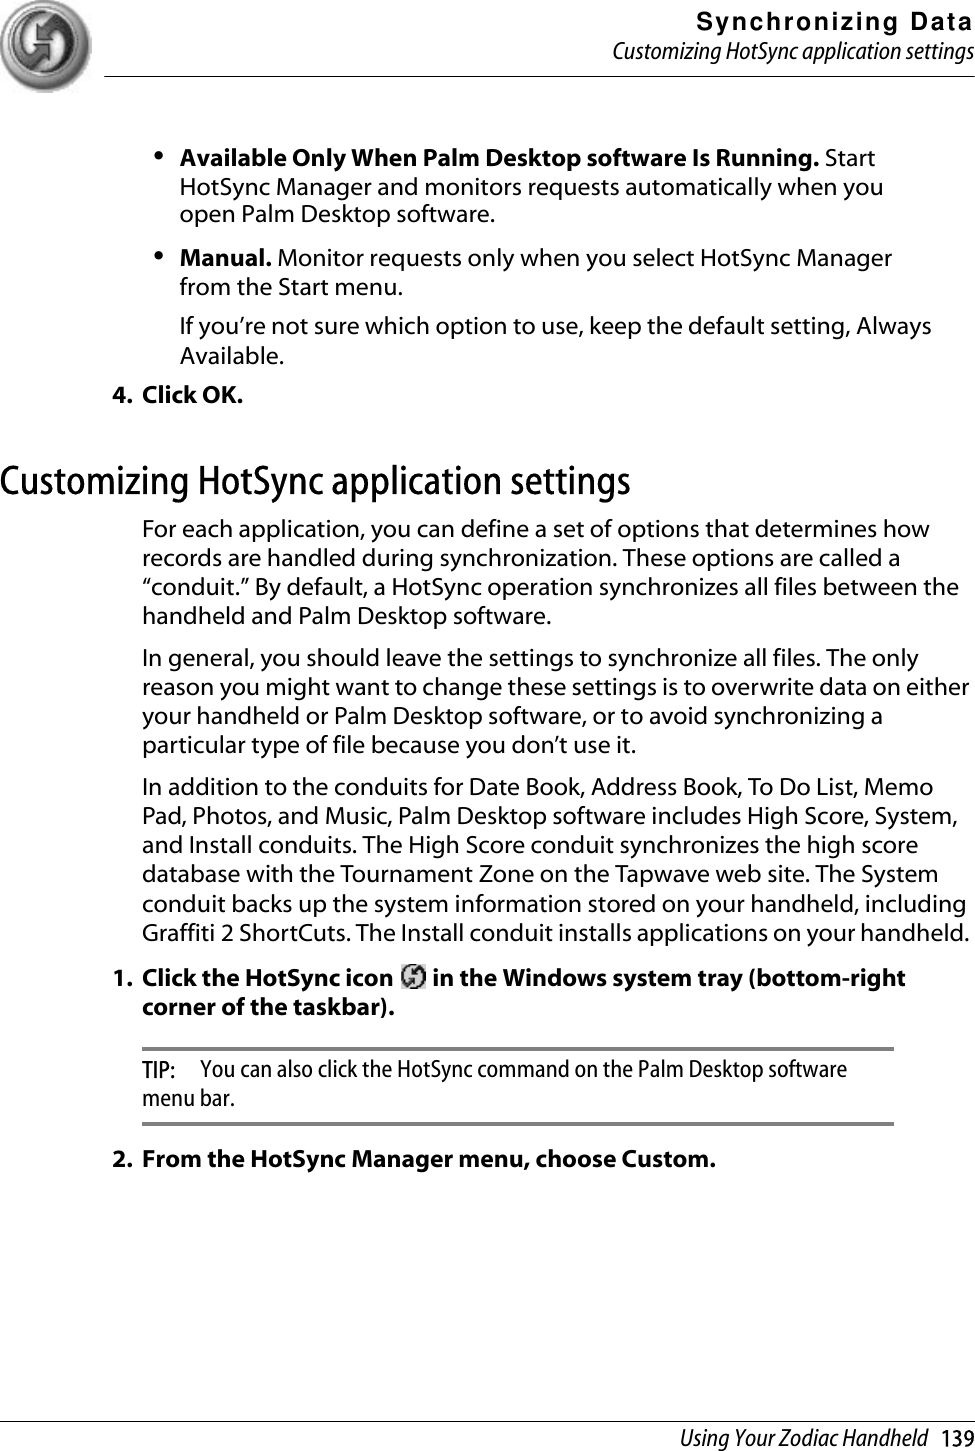 Synchronizing DataCustomizing HotSync application settingsUsing Your Zodiac Handheld   139•Available Only When Palm Desktop software Is Running. Start HotSync Manager and monitors requests automatically when you open Palm Desktop software.•Manual. Monitor requests only when you select HotSync Manager from the Start menu.If you’re not sure which option to use, keep the default setting, Always Available.4. Click OK.Customizing HotSync application settingsFor each application, you can define a set of options that determines how records are handled during synchronization. These options are called a “conduit.” By default, a HotSync operation synchronizes all files between the handheld and Palm Desktop software. In general, you should leave the settings to synchronize all files. The only reason you might want to change these settings is to overwrite data on either your handheld or Palm Desktop software, or to avoid synchronizing a particular type of file because you don’t use it.In addition to the conduits for Date Book, Address Book, To Do List, Memo Pad, Photos, and Music, Palm Desktop software includes High Score, System, and Install conduits. The High Score conduit synchronizes the high score database with the Tournament Zone on the Tapwave web site. The System conduit backs up the system information stored on your handheld, including Graffiti 2 ShortCuts. The Install conduit installs applications on your handheld. 1. Click the HotSync icon   in the Windows system tray (bottom-right corner of the taskbar).TIP:  You can also click the HotSync command on the Palm Desktop software menu bar.2. From the HotSync Manager menu, choose Custom.